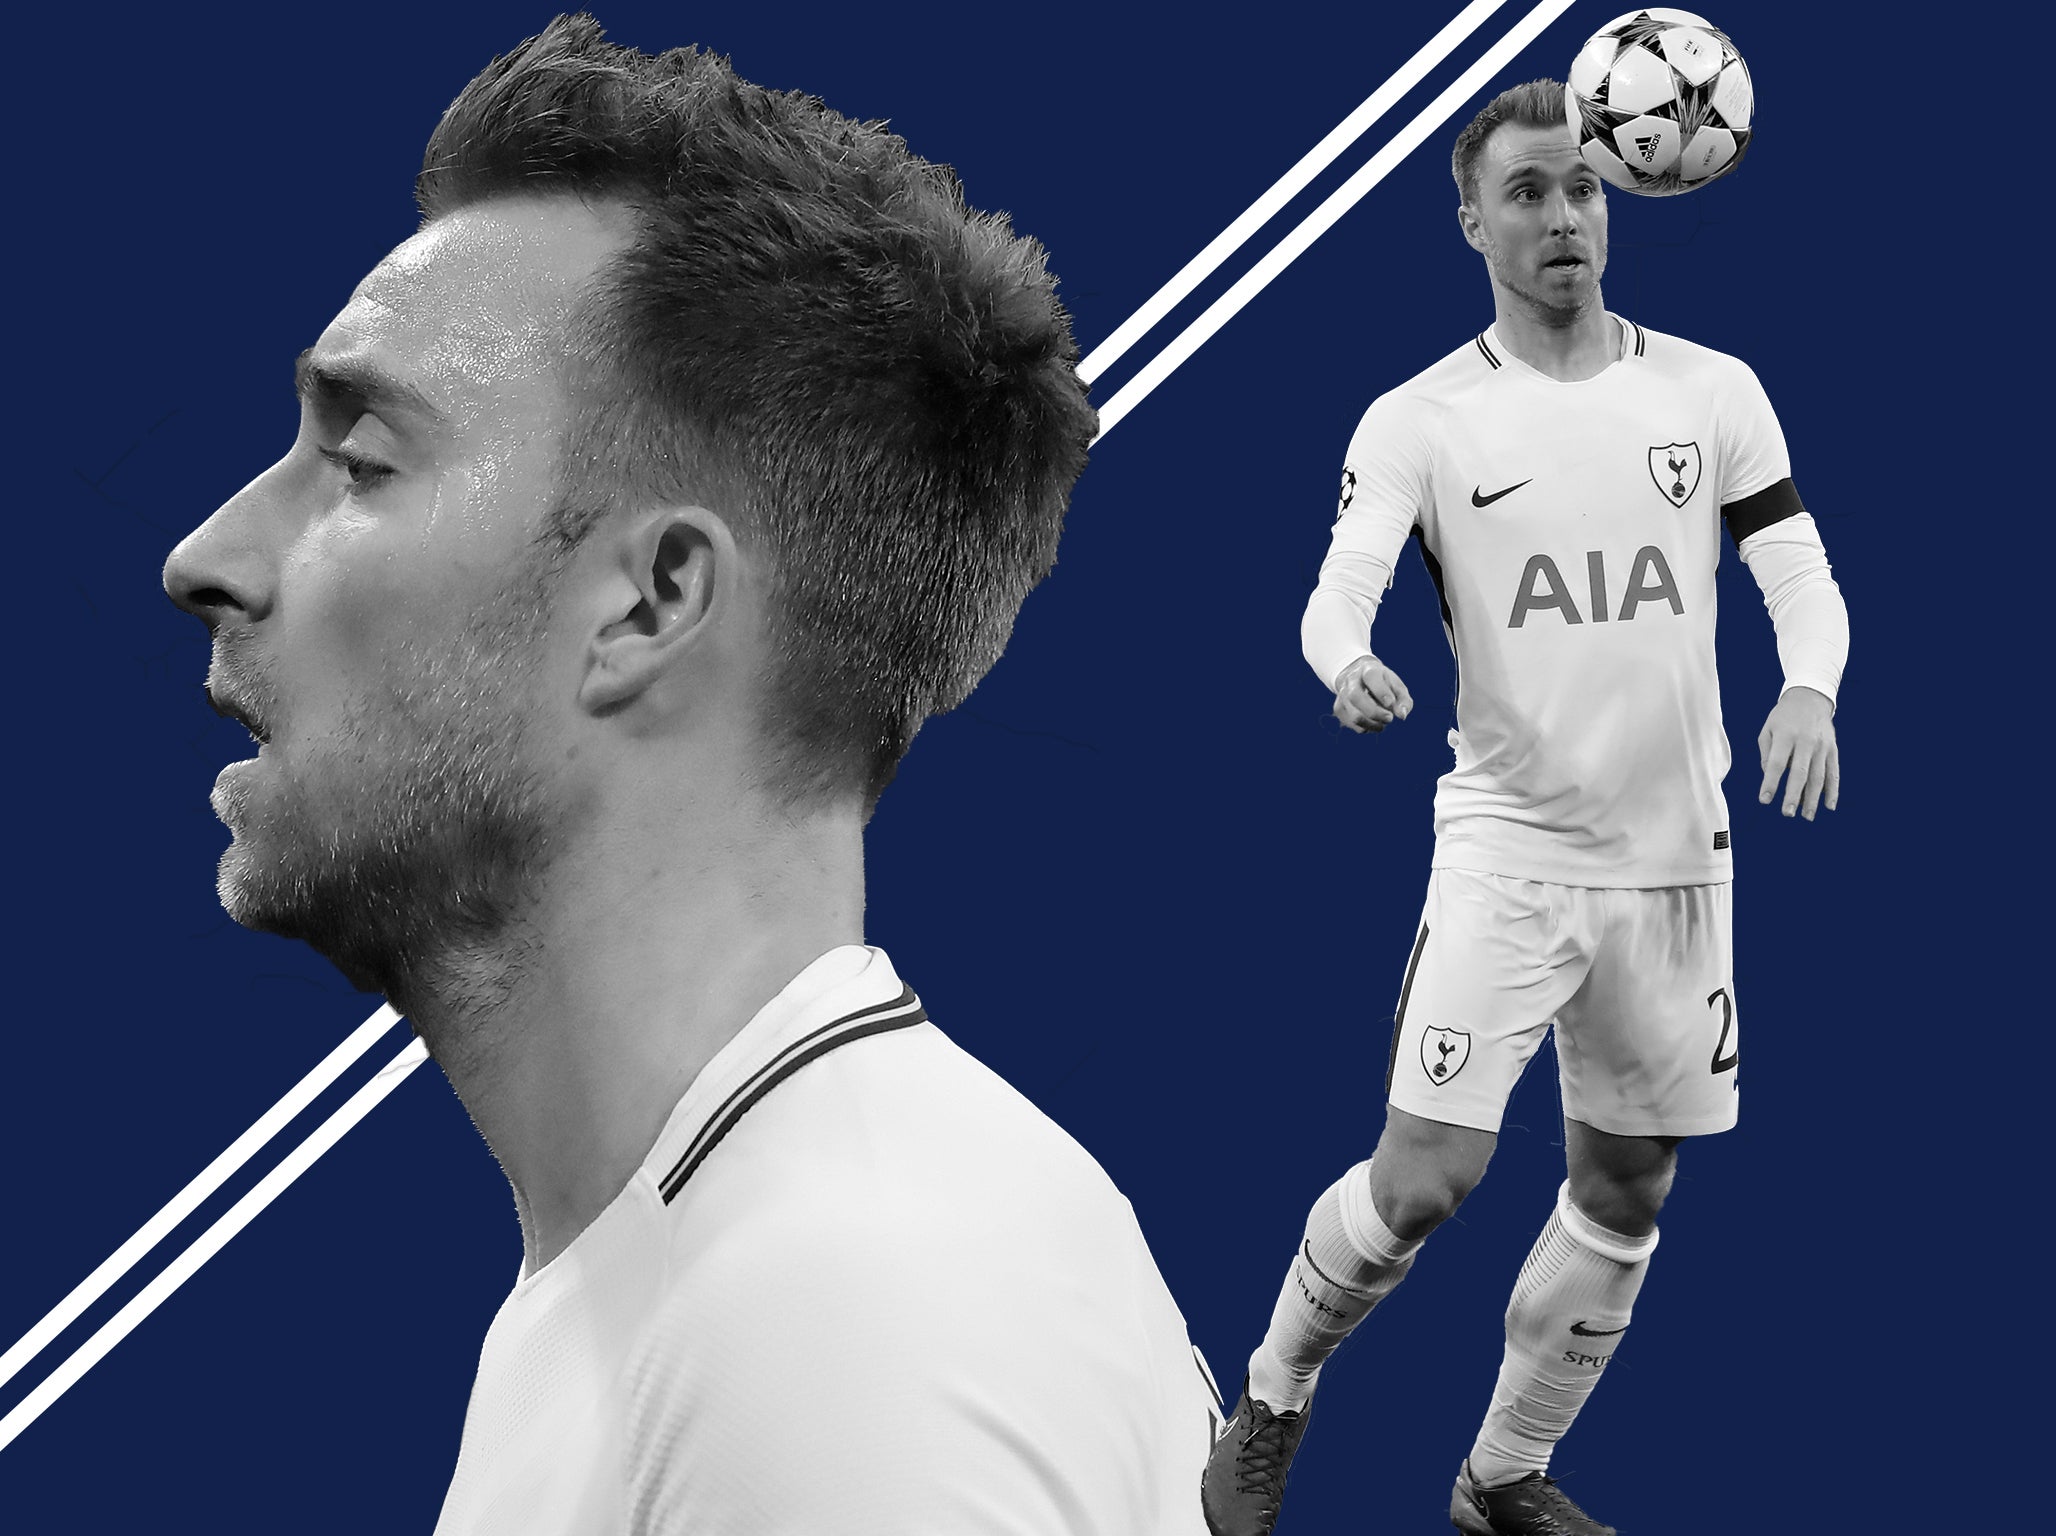 Christian Eriksen operates on a different plane to his rivals